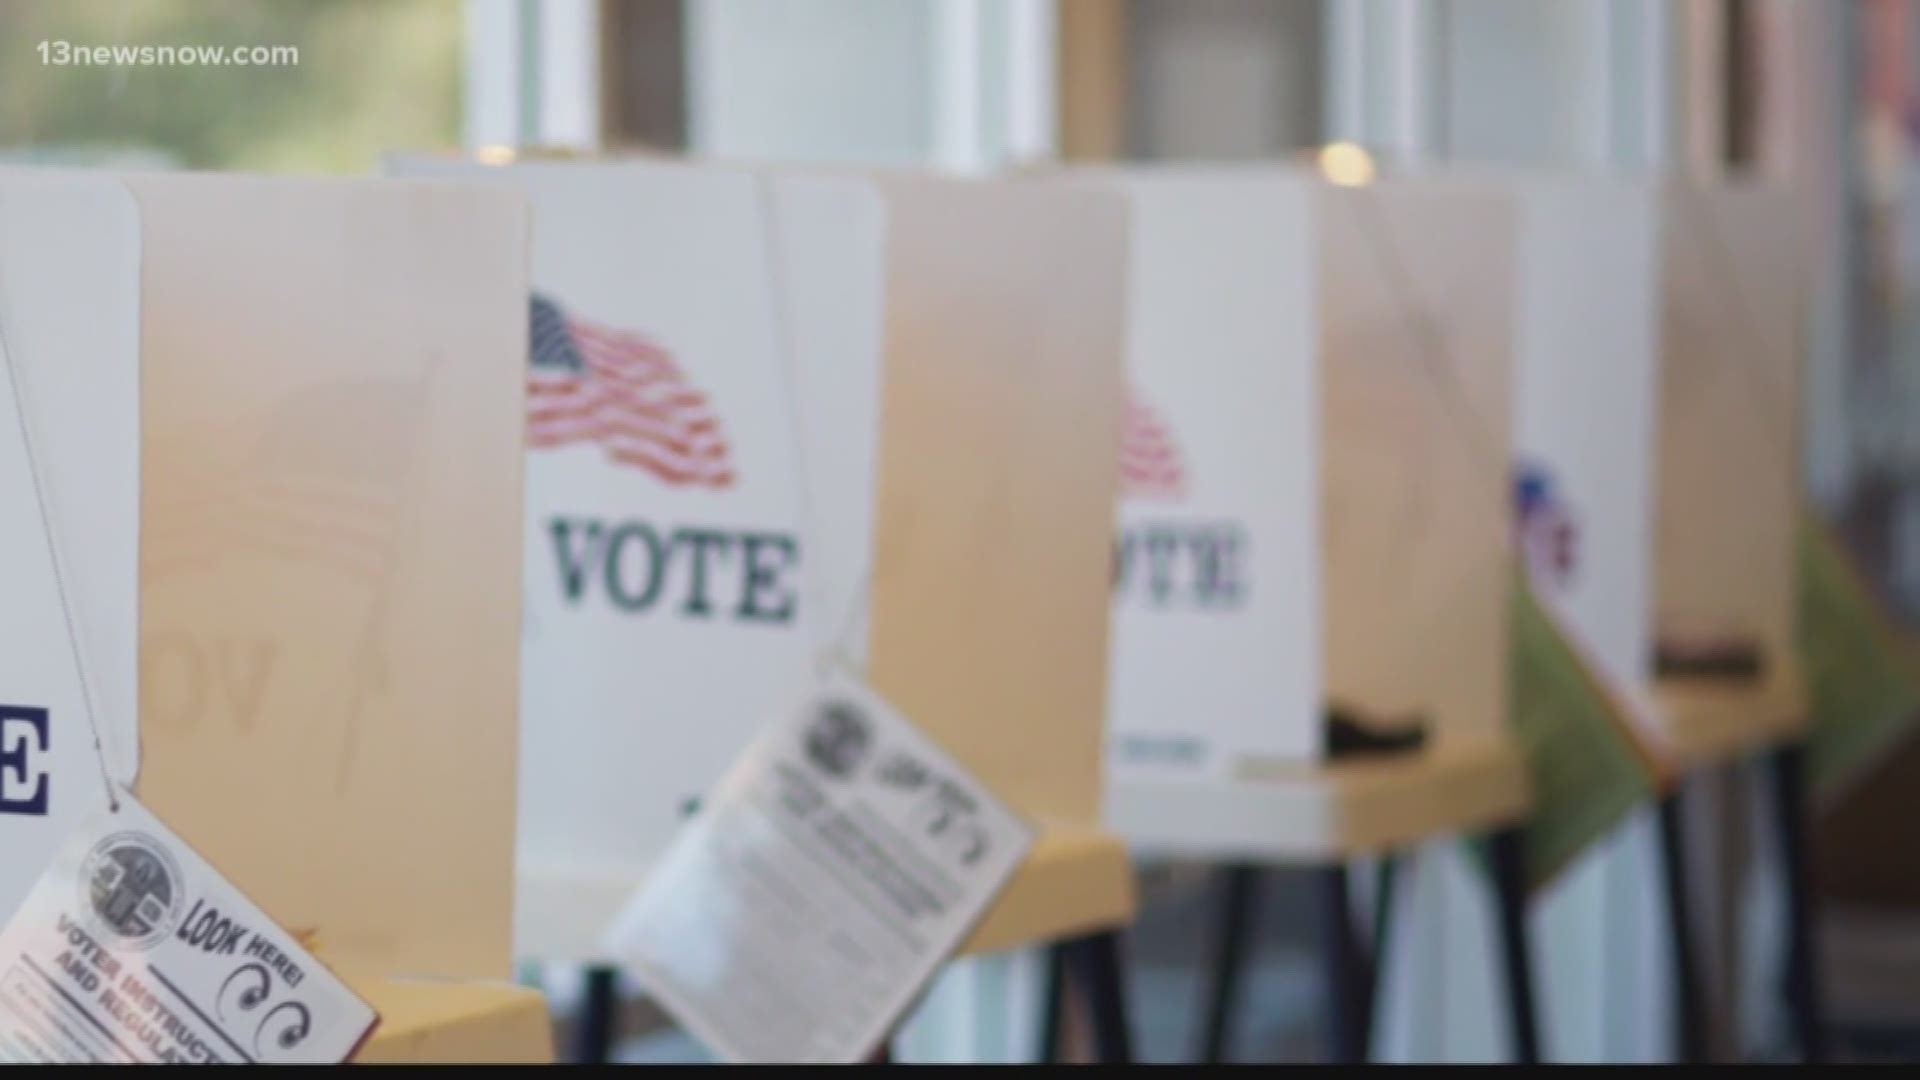 Votes will be recounted in three different city council races in Virginia Beach.